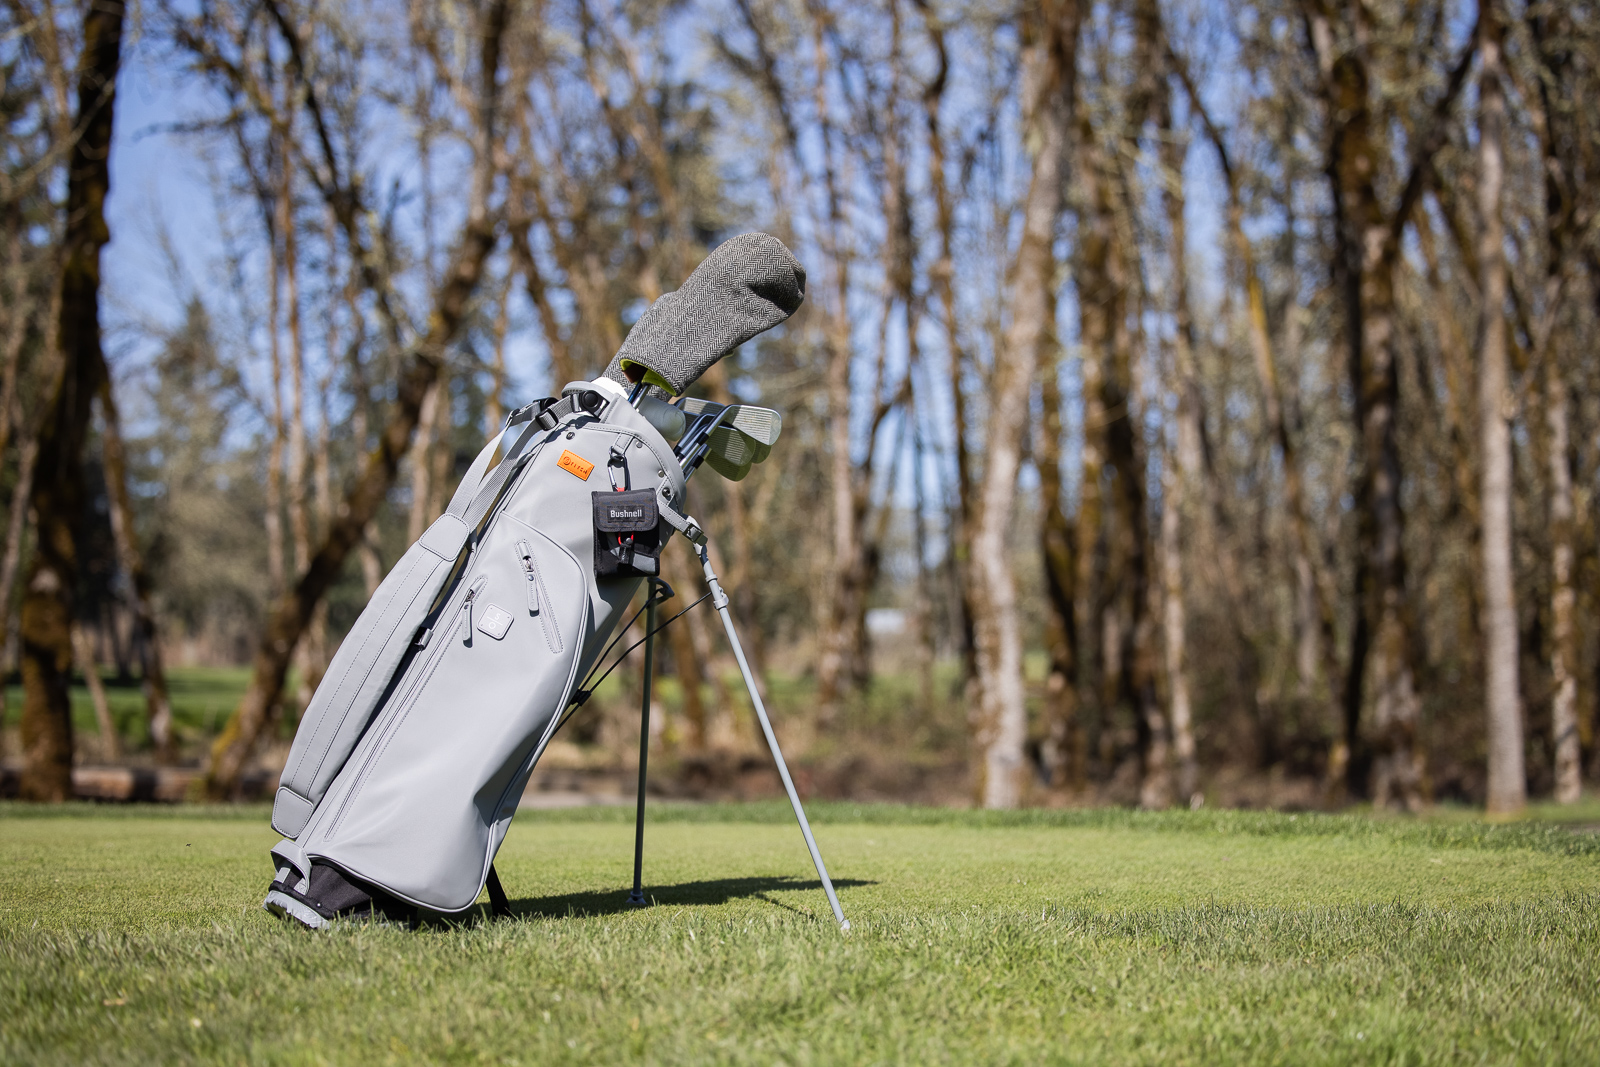 Stitch Golf Bag Review: Is the SL2 the Best Walking Bag Out There?